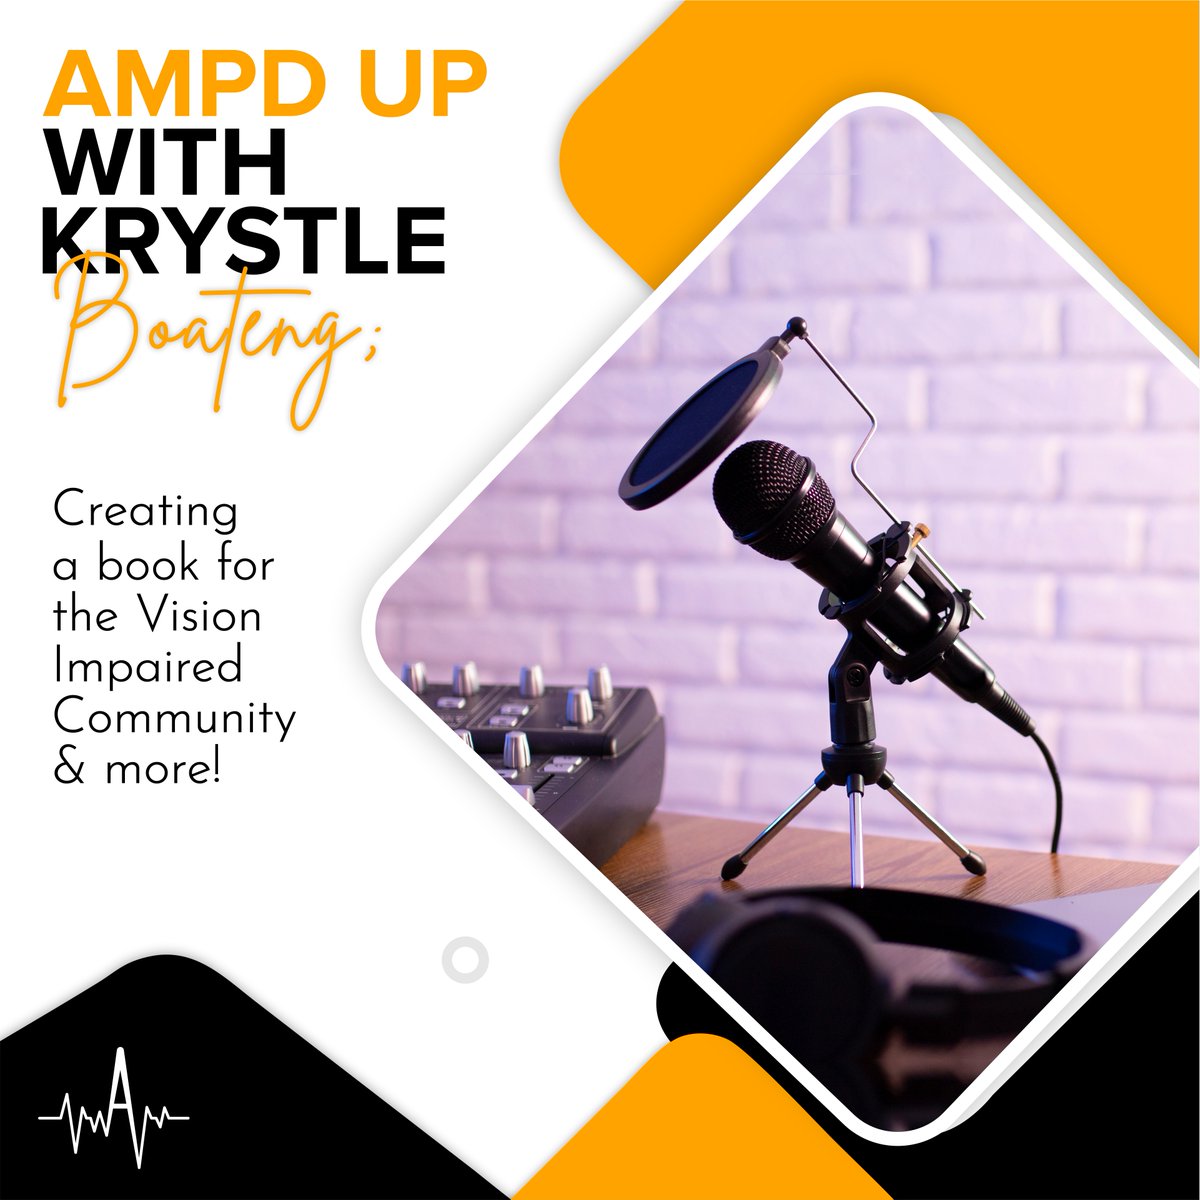 As a low vision Mother of 2, Author Krystle Boateng explains what life is like being a part of the low-vision community. Krystle shares her trials and tribulations and how she was able to channel them toward her creativity.
#LowVisionCommunity #AuthorLife #TrialsAndTribulations